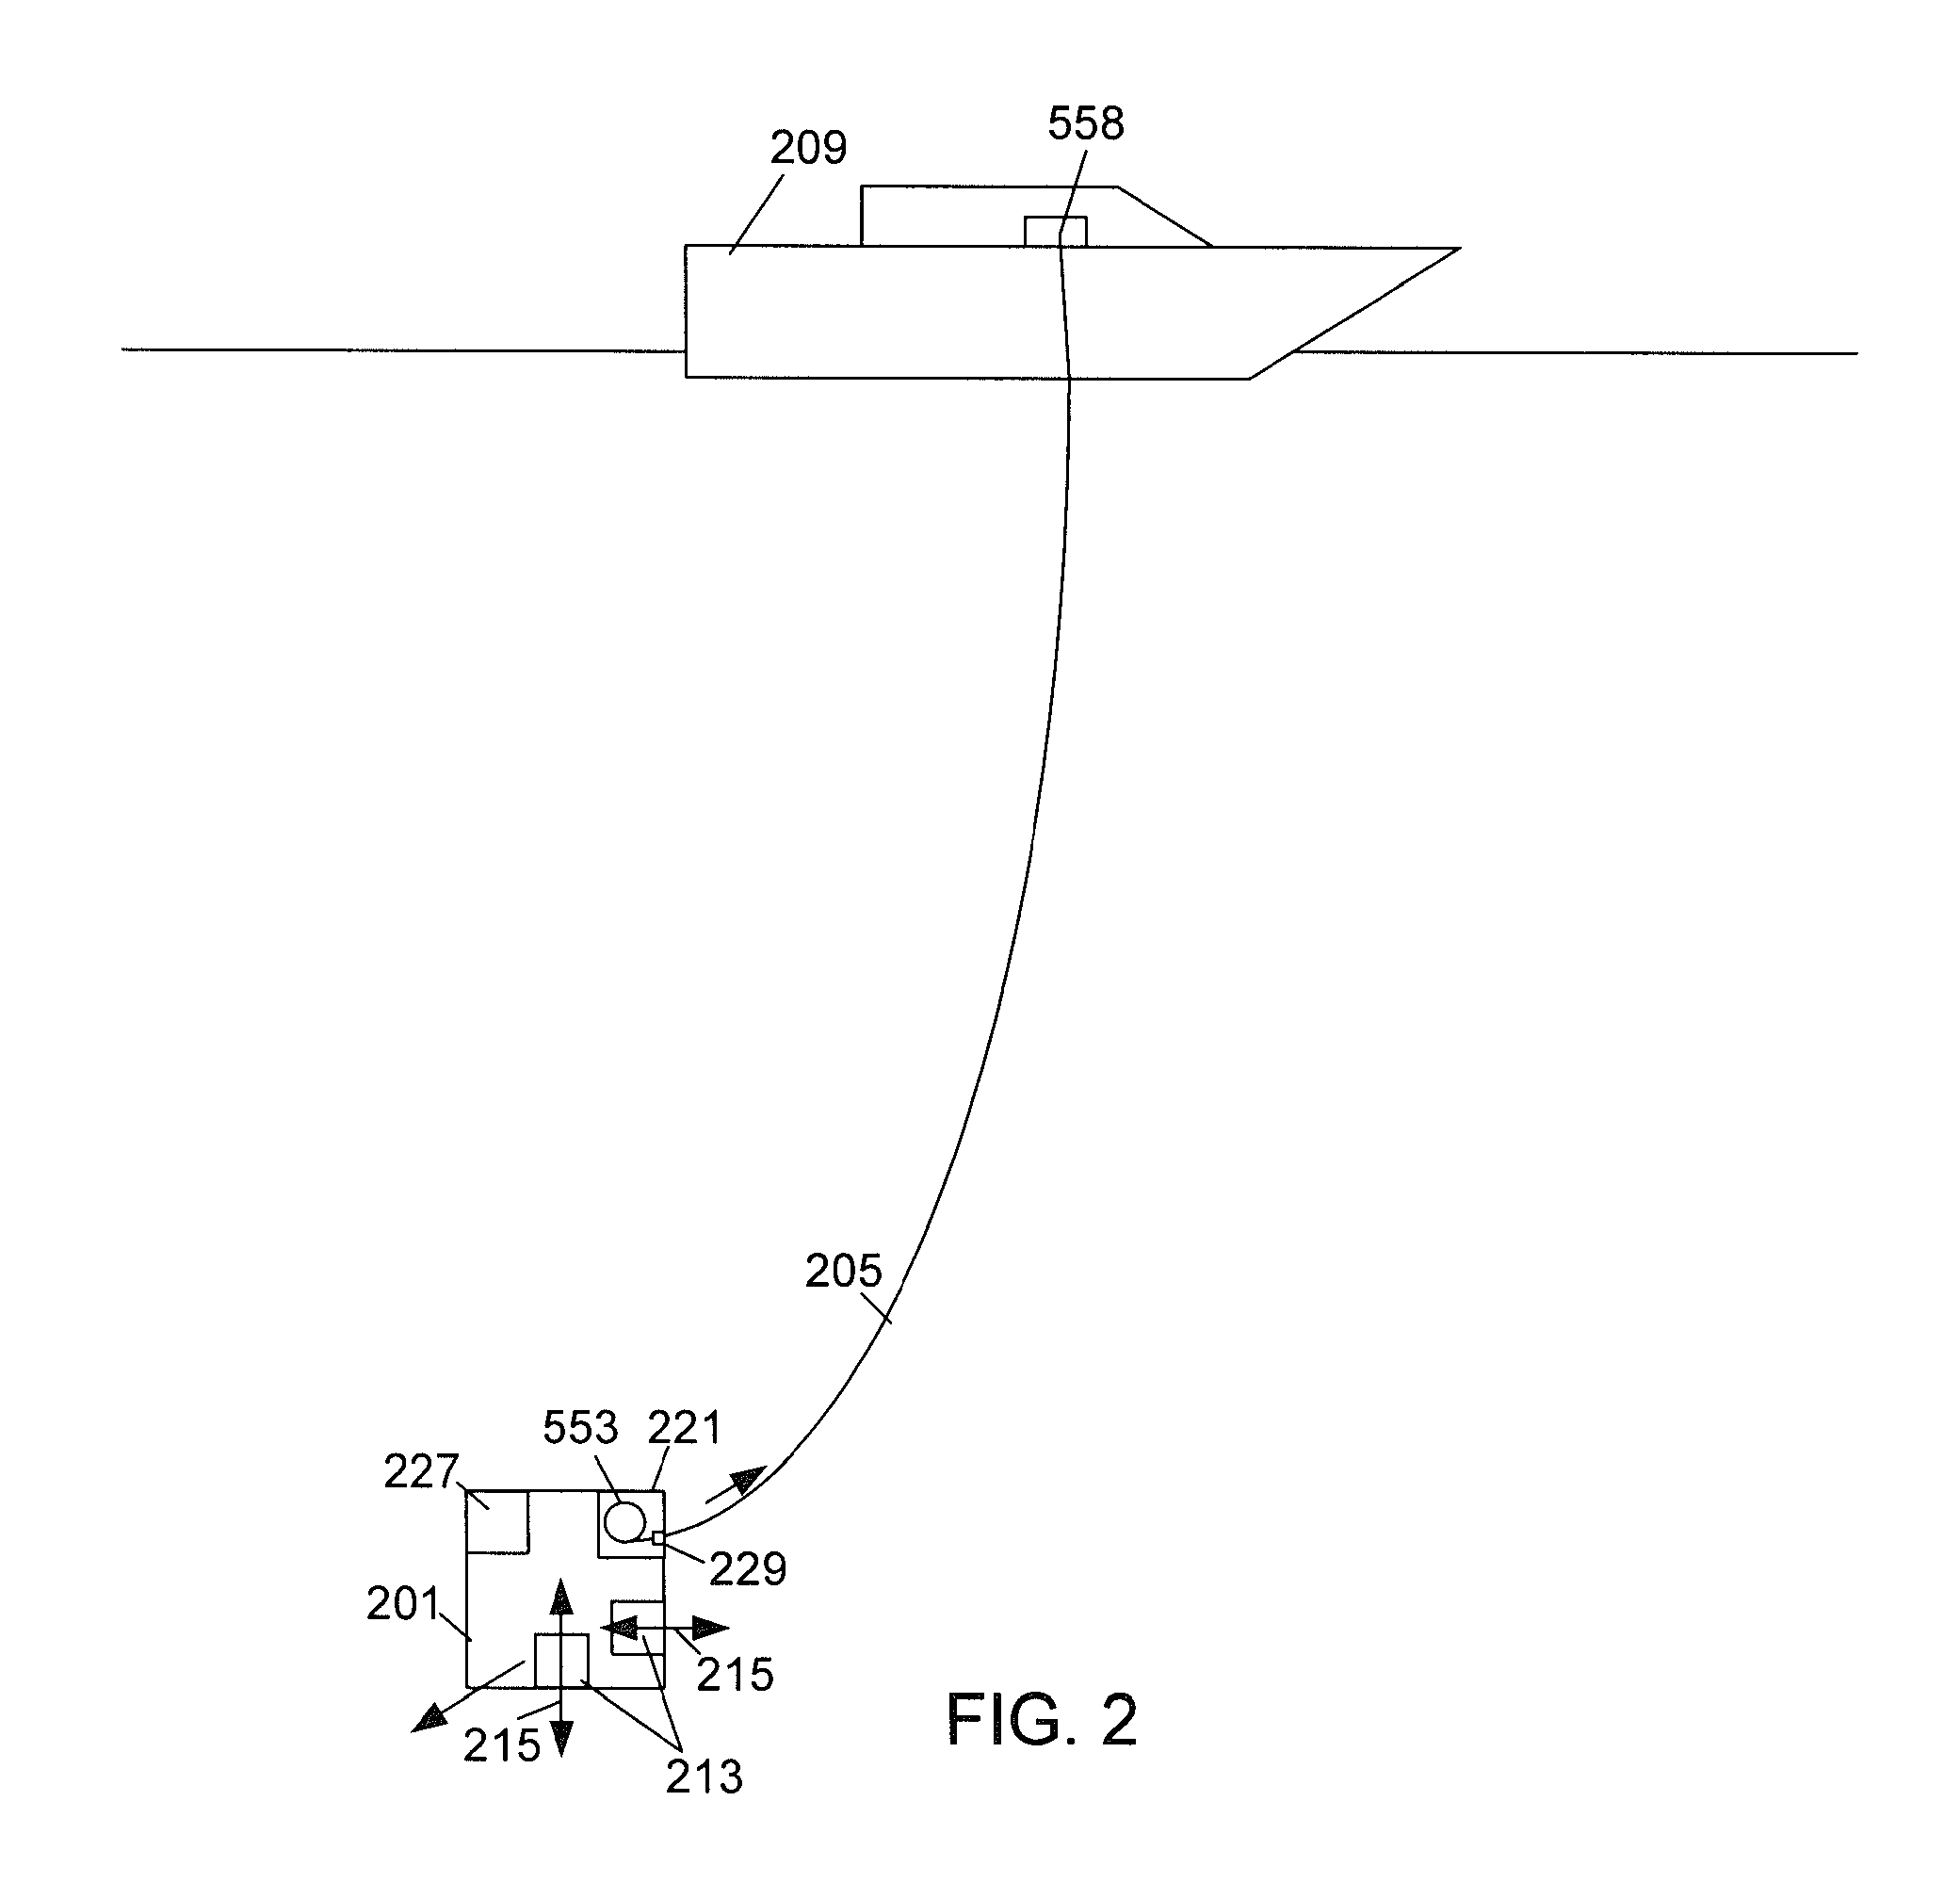 Internal winch for self payout and re-wind of a small diameter tether for underwater remotely operated vehicle